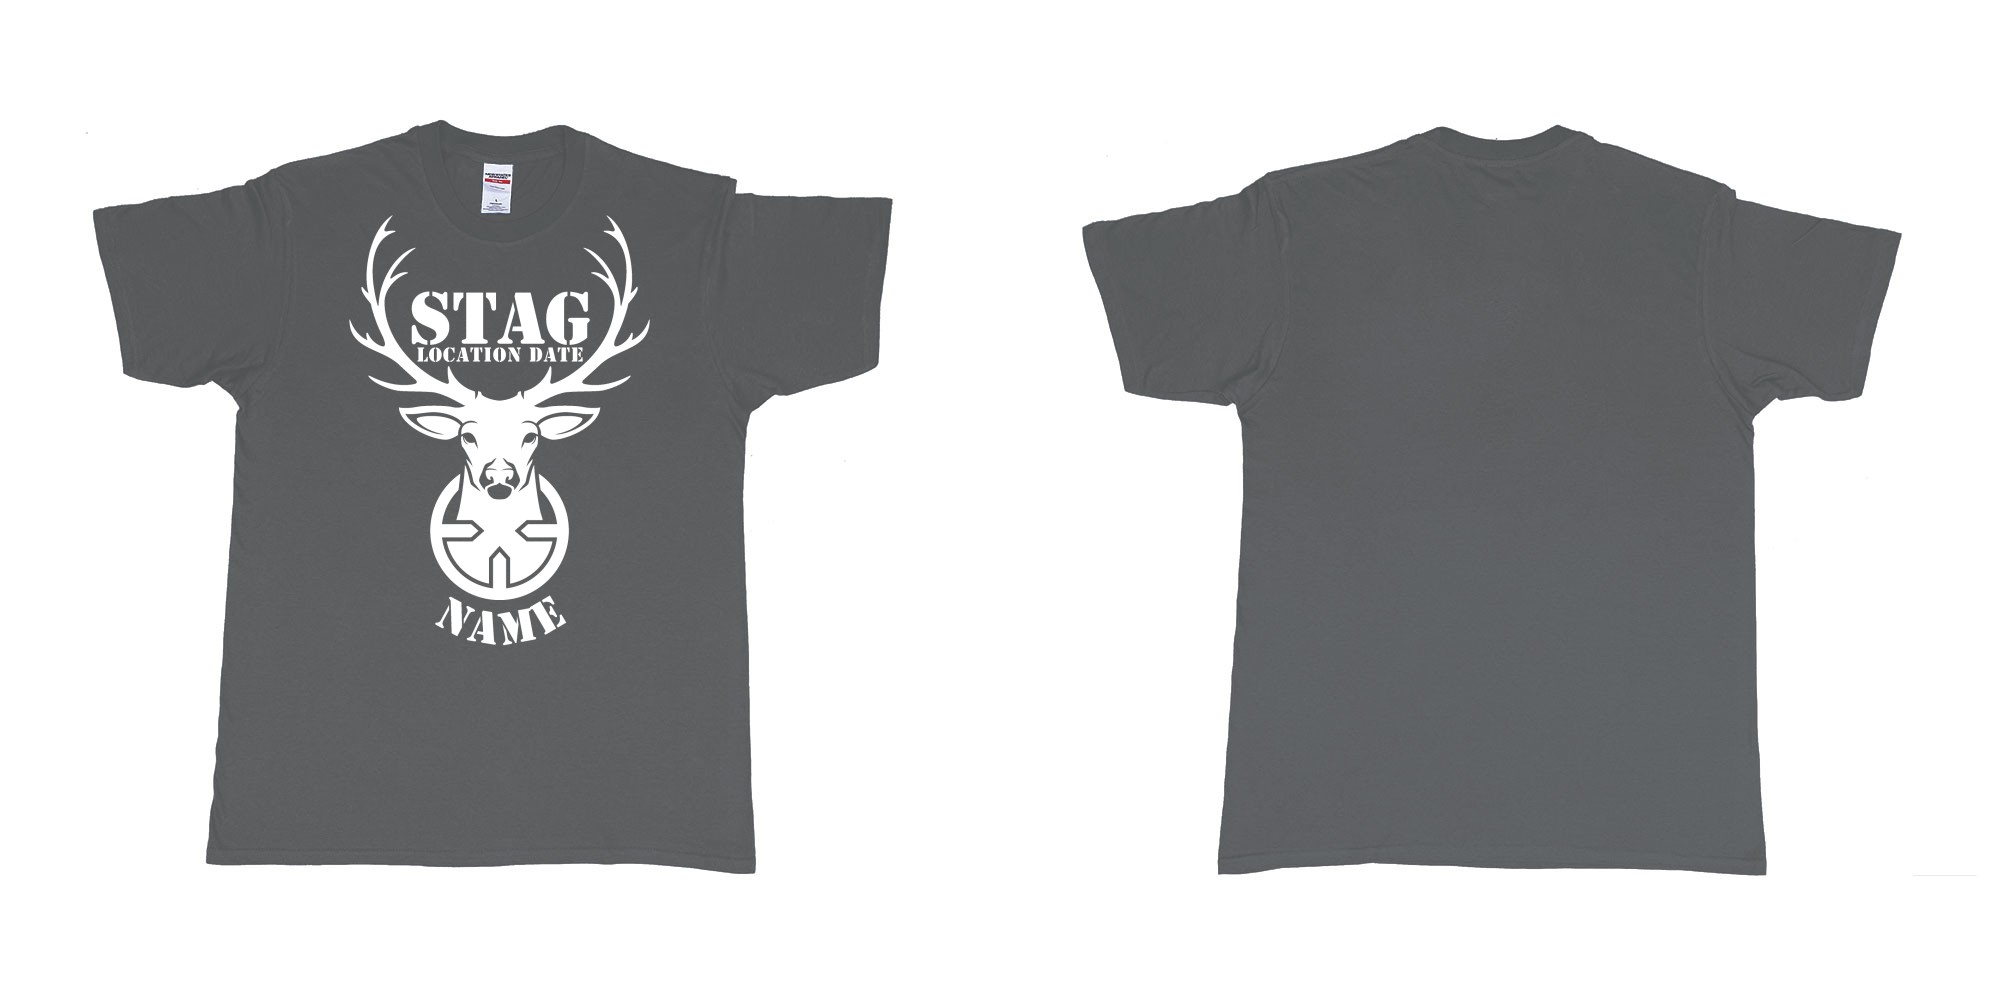 Custom tshirt design aiming for a stag custom tshirt print in fabric color charcoal choice your own text made in Bali by The Pirate Way